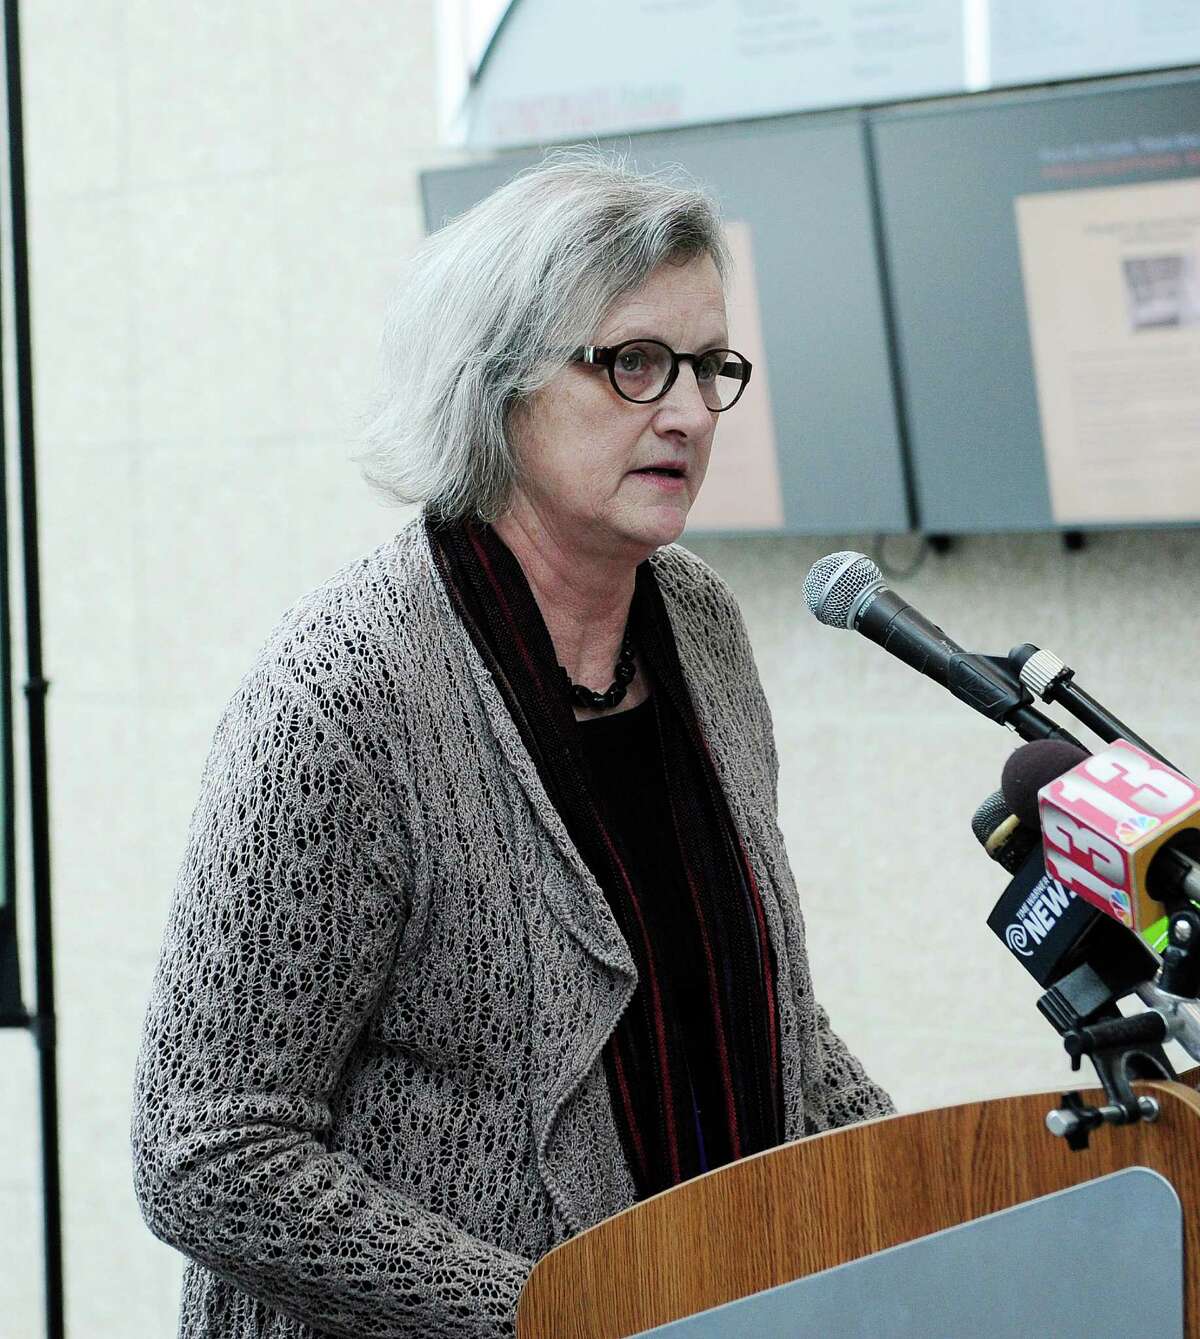 Jeannette Rice, a friend of Joel Melnikoff, talks about Joel at an event for an exhibit on drugged driving at the Albany College of Pharmacy and Health Sciences on Monday, March 10, 2014 in Albany, NY. The exhibit tells the stories of several deaths in this area from people who were impaired by medications at the time of the accidents. Joel Melnikoff was killed when he was struck by Darlene Kawczak on Route 32 in Bethlehem in 2006. (Paul Buckowski / Times Union)